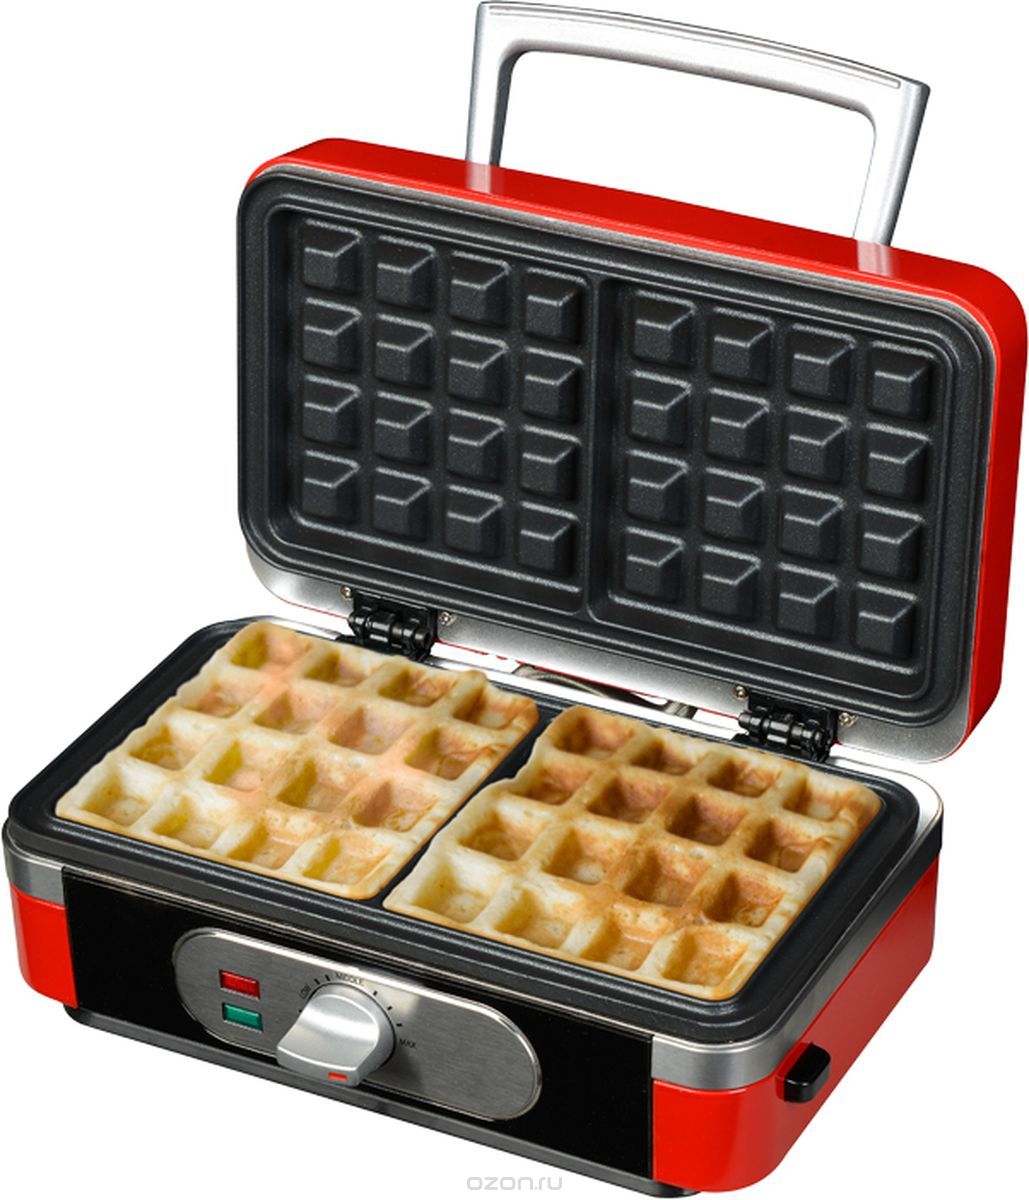  GFgril GF-040 Waffle-Grill-Toast, Red 3  1